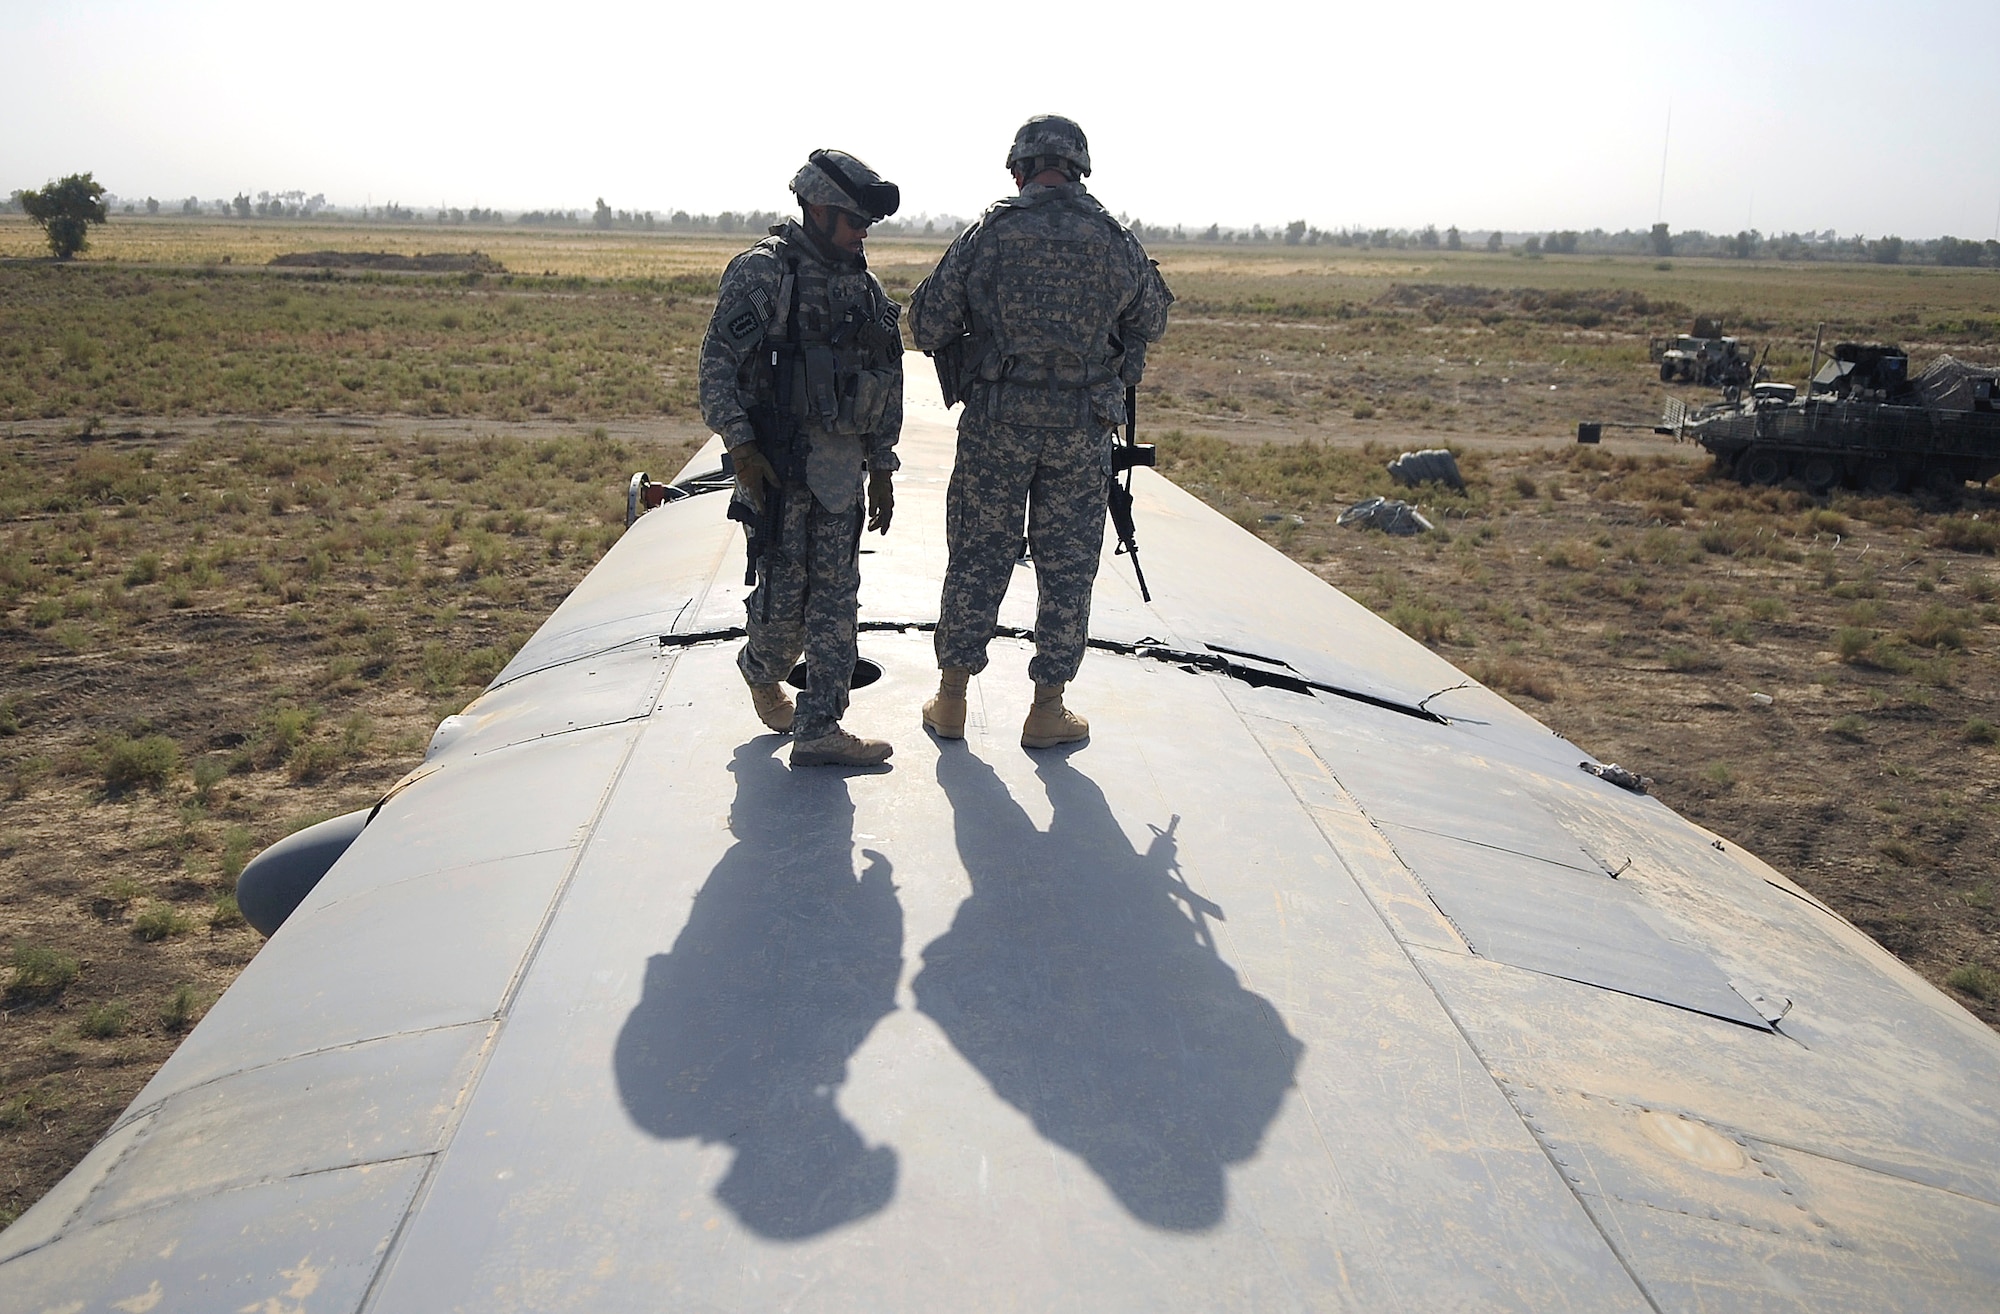 Senior Master Sgt. Pervis King, left, and Staff Sgt. Joshua Langdon from the 447th Air Expeditionary Group's Explosive ordnance disposal team inspect explosive charges placed around the wings of the of a C-130 Hercules aircraft that are designed to divide the plane into smaller sections so it can be moved July 7 in Baghdad, Iraq. The C-130 made an emergency landing in a field north of the Baghdad International Airport shortly after take-off on June 27. (U.S. Air Force photo/Tech. Sgt. Jeffrey Allen)